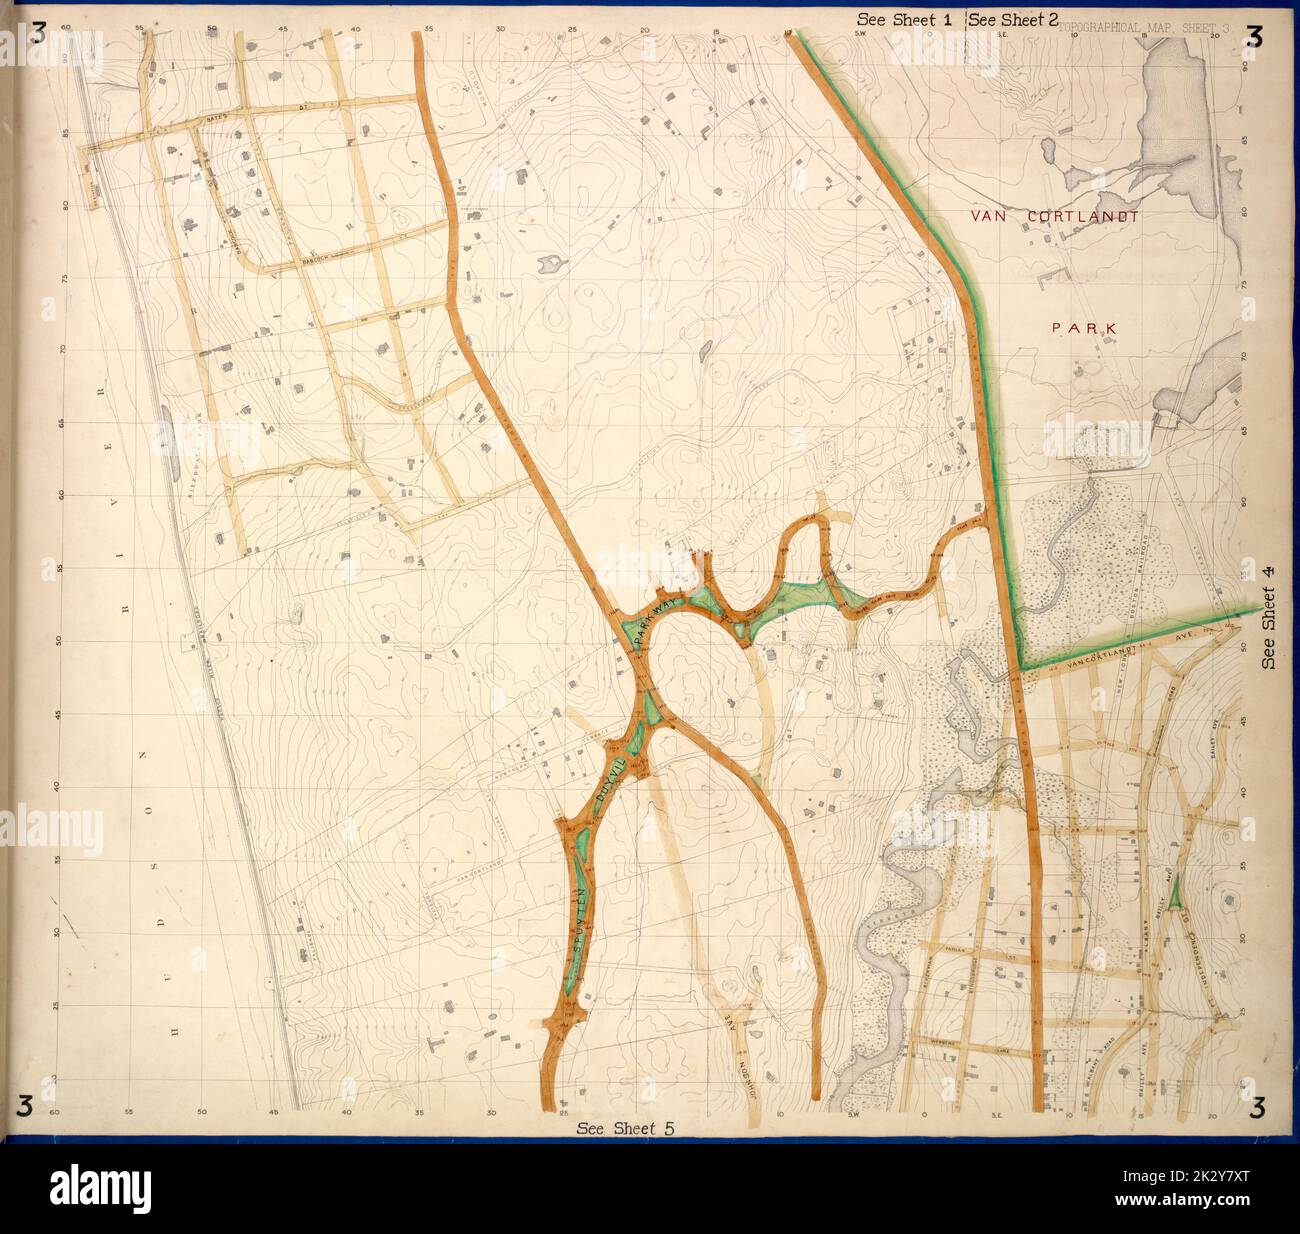 New York (N.Y.). Department of Parks. Topographical Division. Cartographic, Maps. 1873. Lionel Pincus and Princess Firyal Map Division. Westchester County (N.Y.), New York (N.Y.) Bronx, Topographical Map Sheet 3; Map bounded by Bates St., Riverdale Ave., Moshold Ave., Broadway, Vancortlandt Ave., Bailey Ave., Ft. Independence St.; Including Albany Road, Church Kingsbridge Ave., Webbers Lane, Ackerman St., Johnson Ave., Spuyten Duyvil Parkway, Hudson River Bailroad Stock Photo